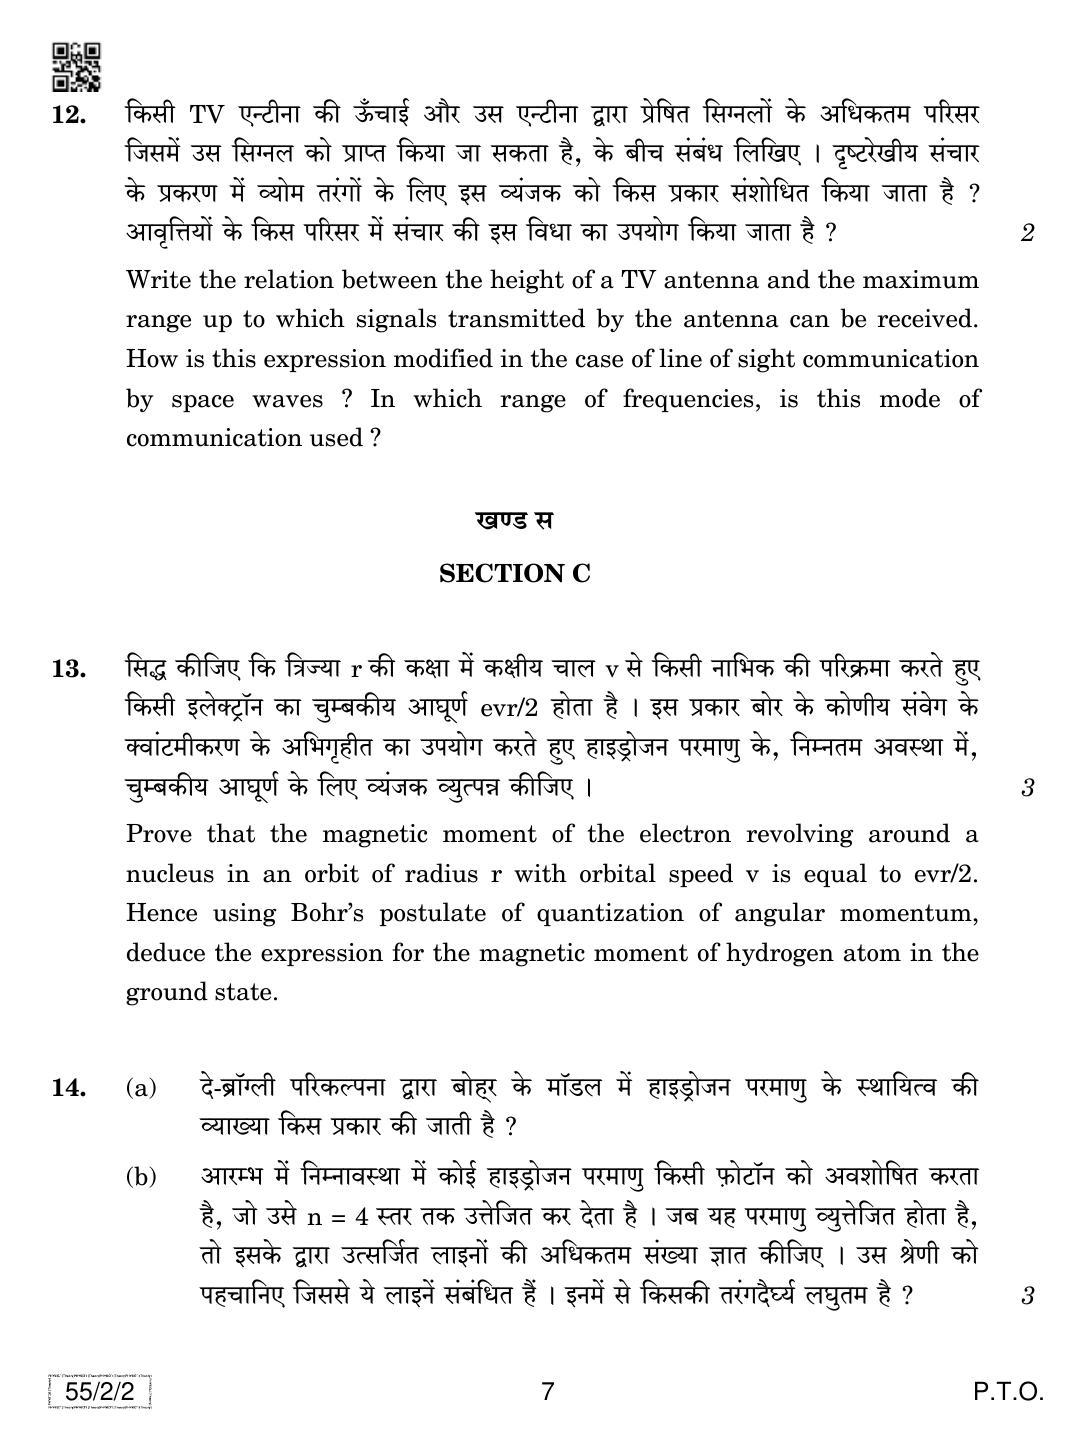 CBSE Class 12 55-2-2 Physics 2019 Question Paper - Page 7